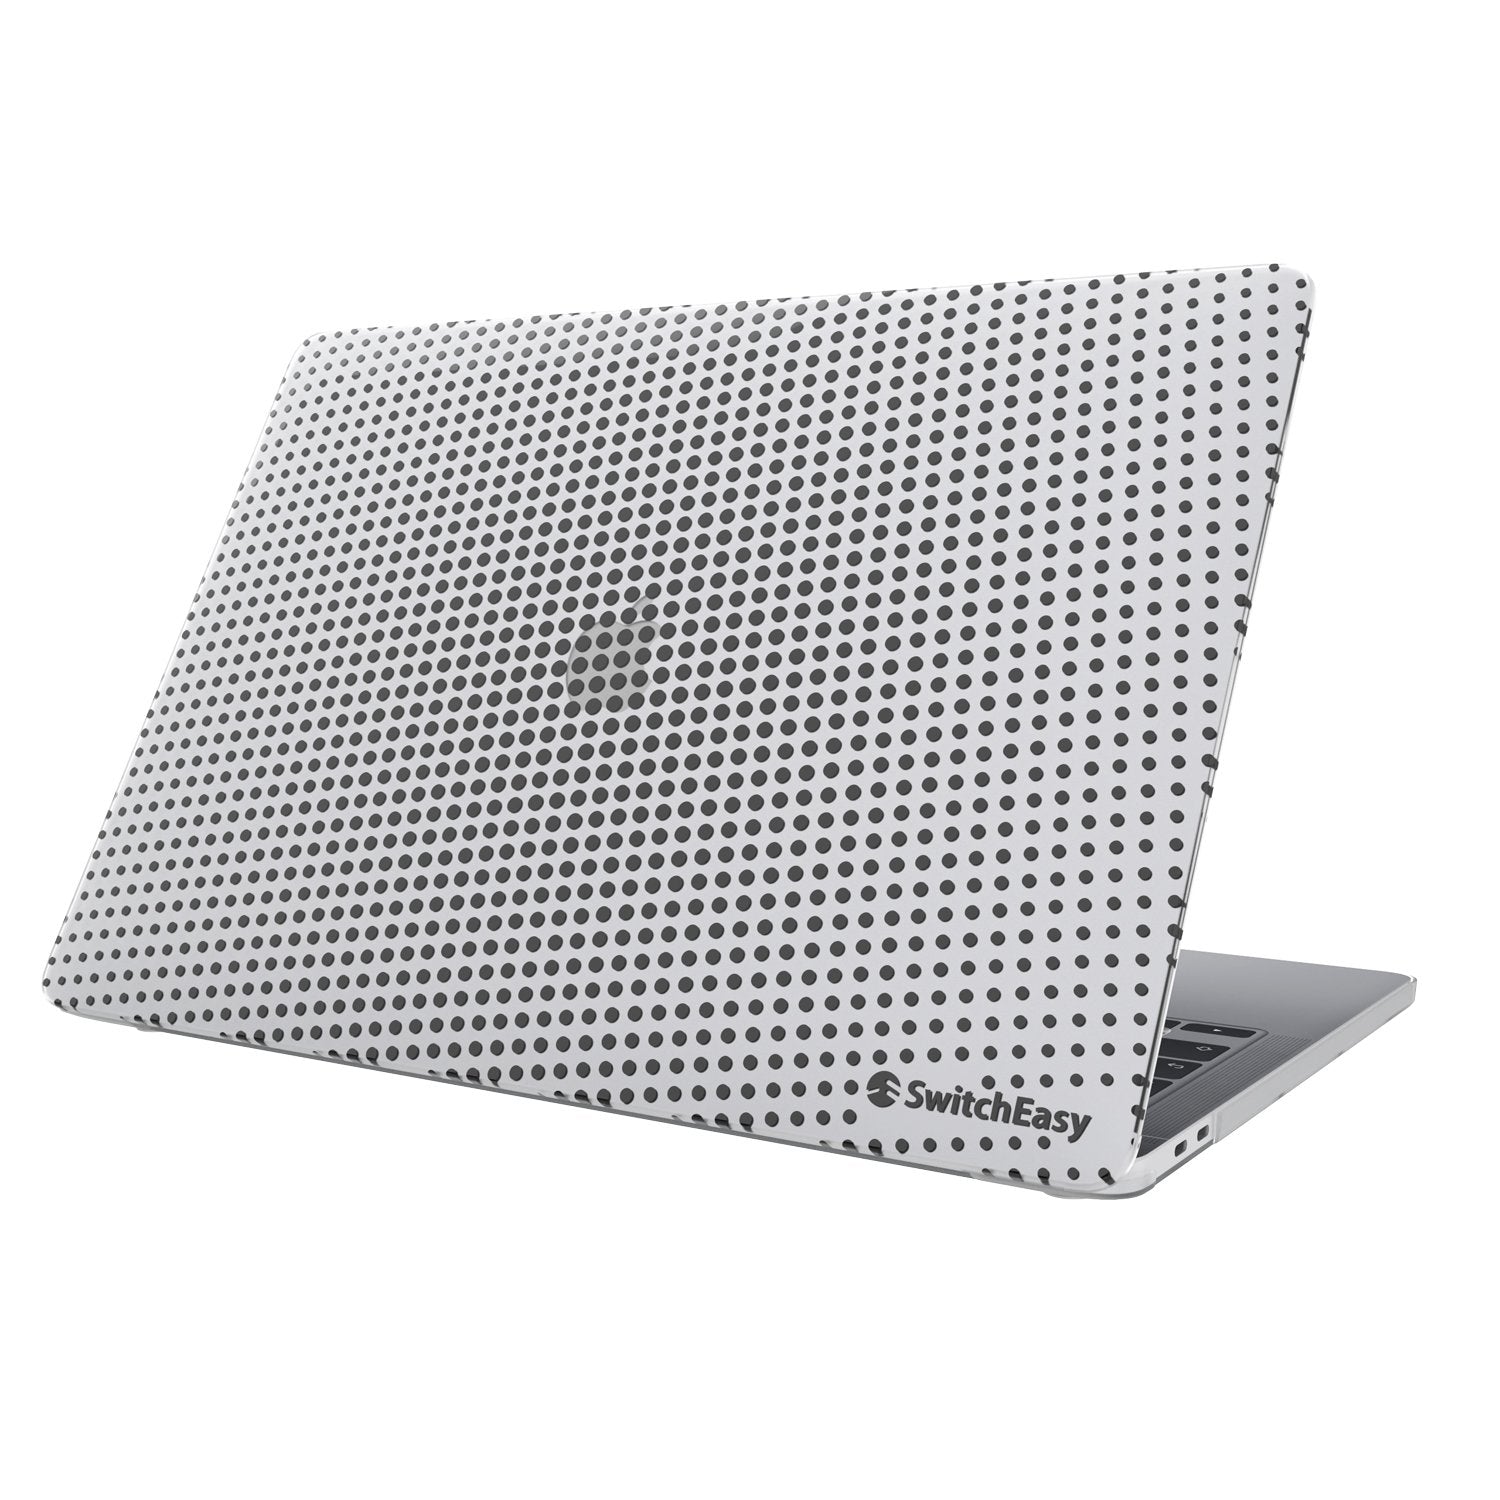 SwitchEasy Dots Case for MacBook Pro 13"(2016-2020)